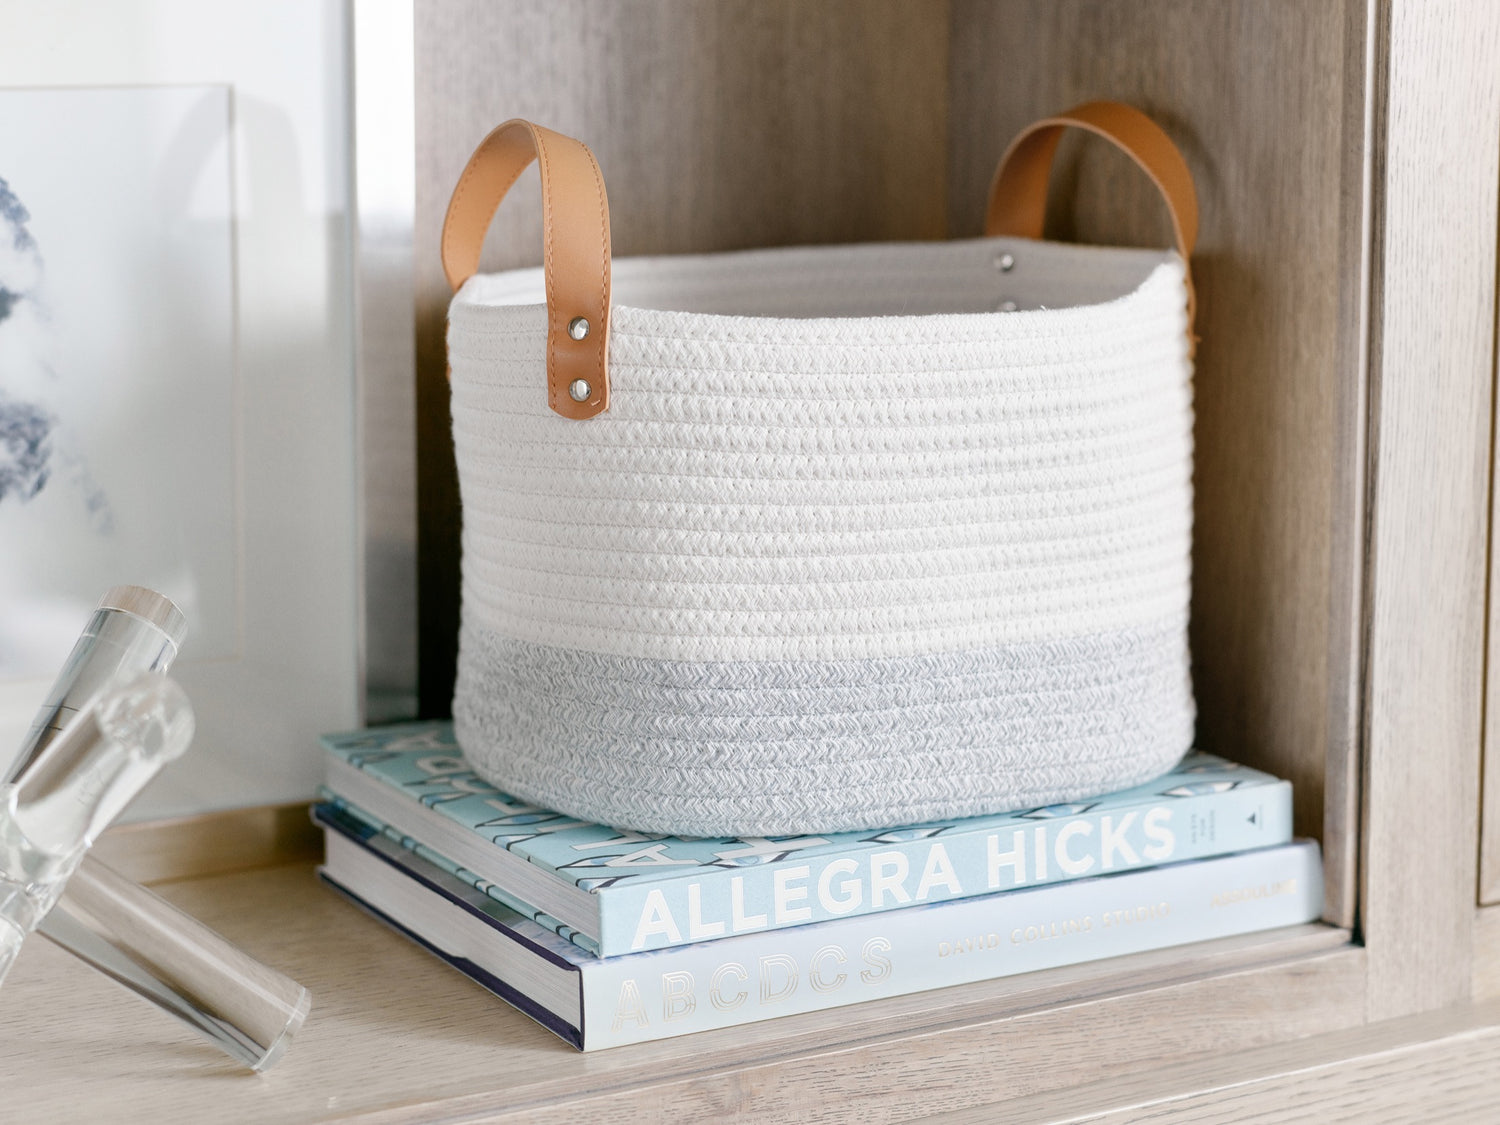 The Santorini basket with white and gray fabric and leather handles makes a beautiful addition to this open shelf.